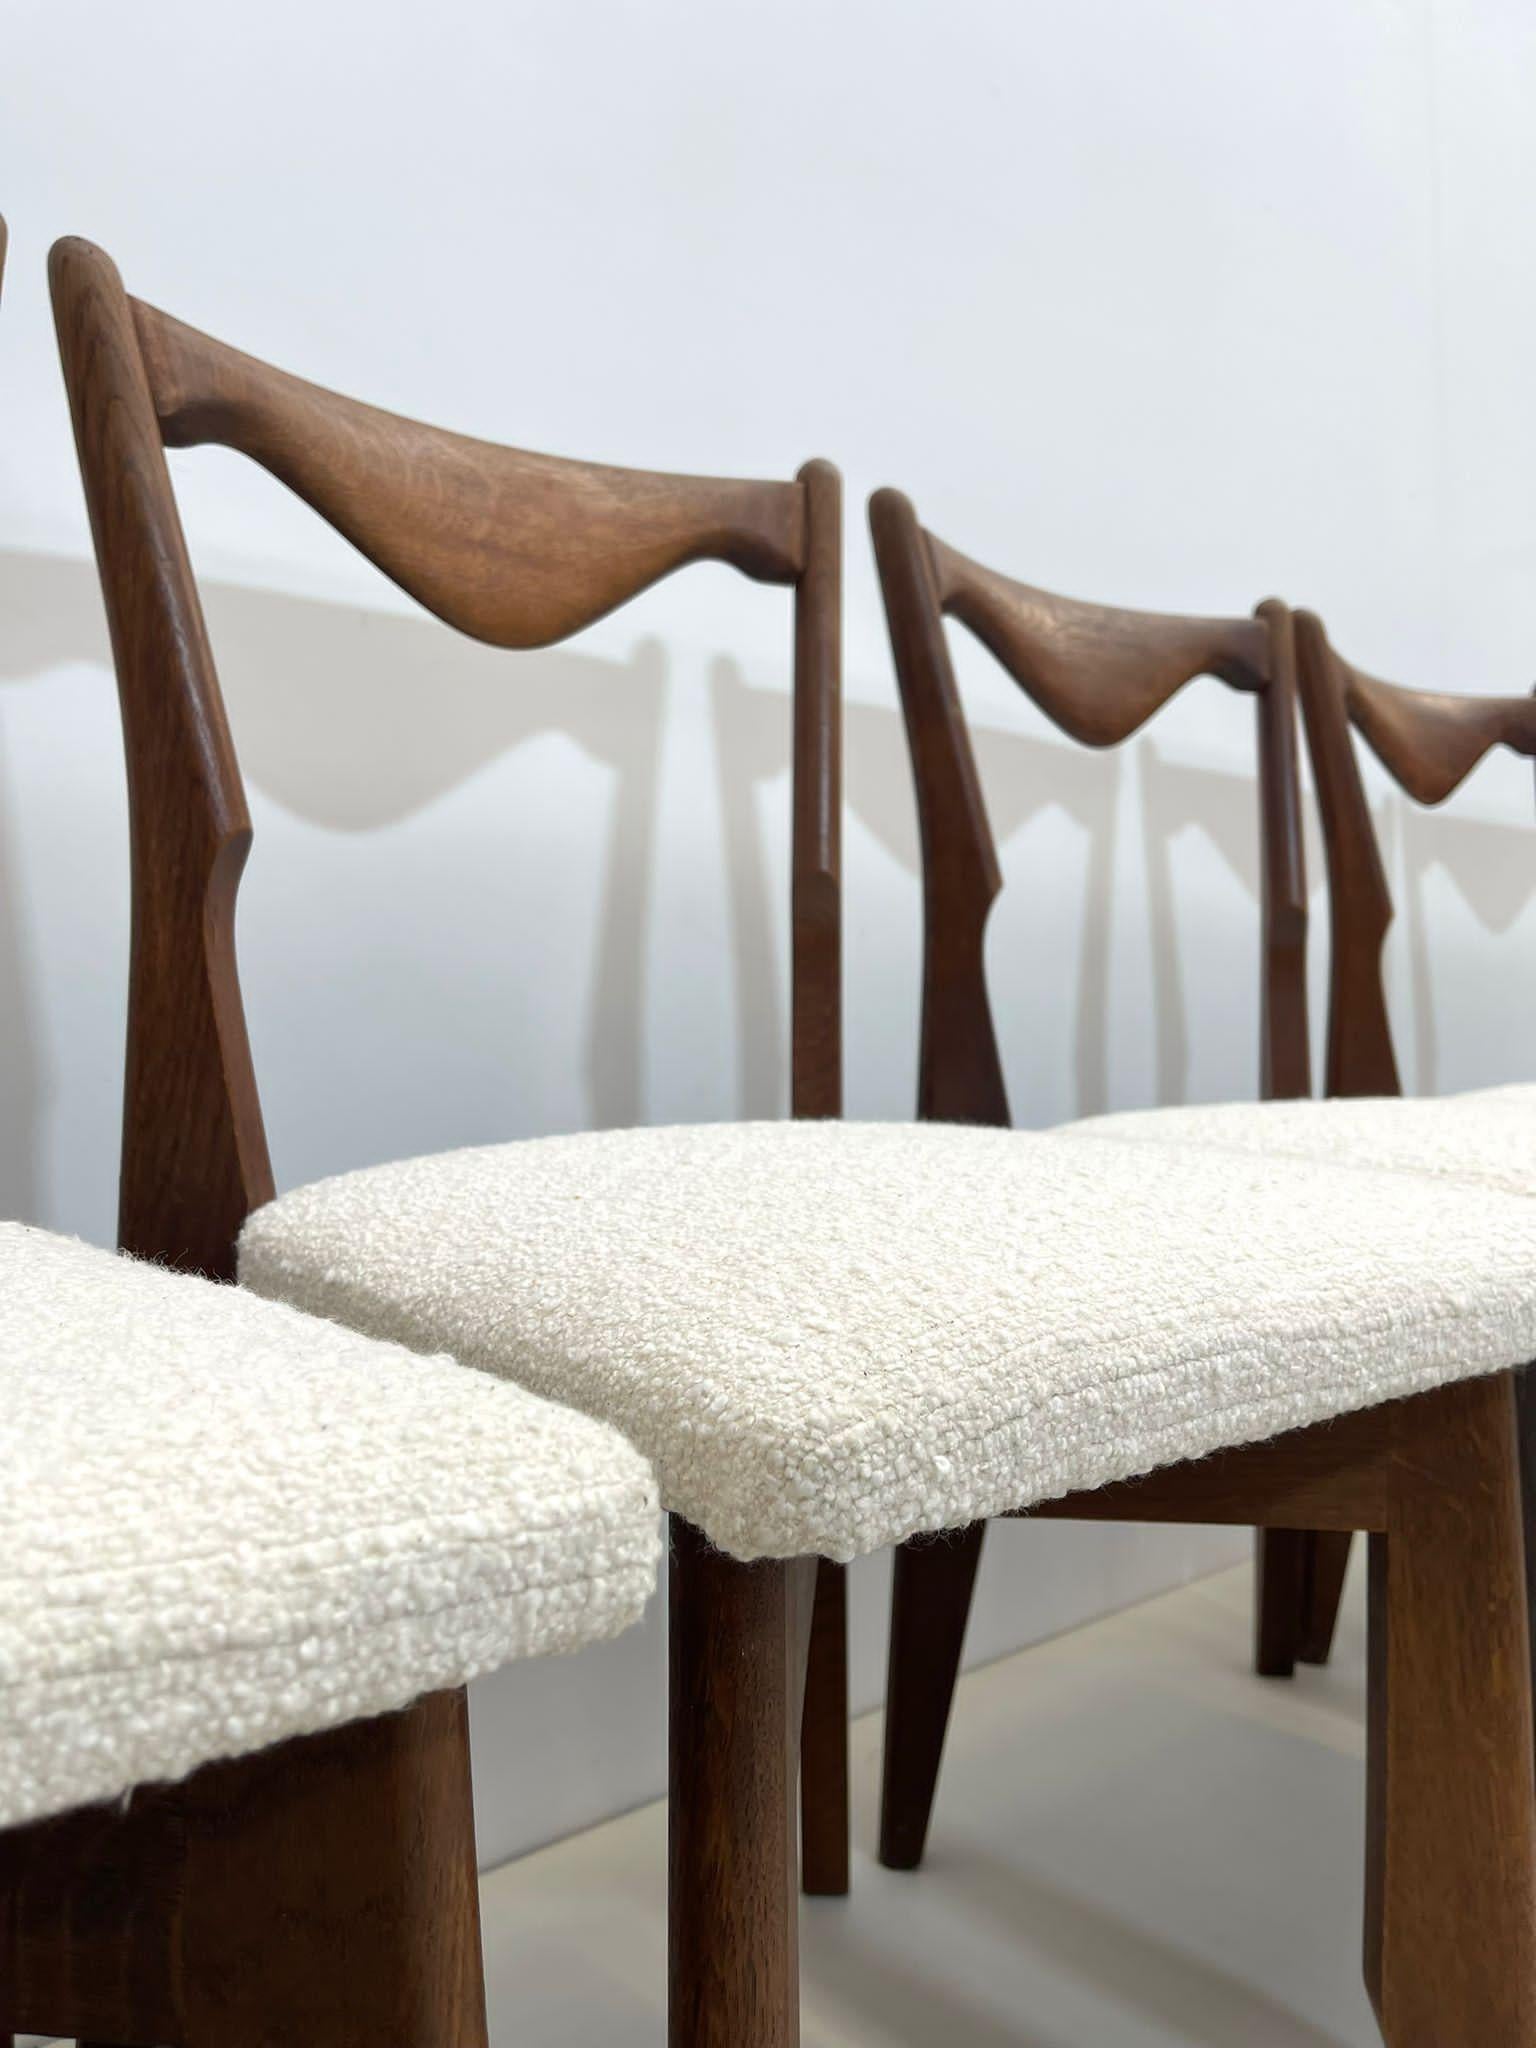 Set of 6 dining chairs by Guillerme et Chambron, France,1960s - New Upholstery.